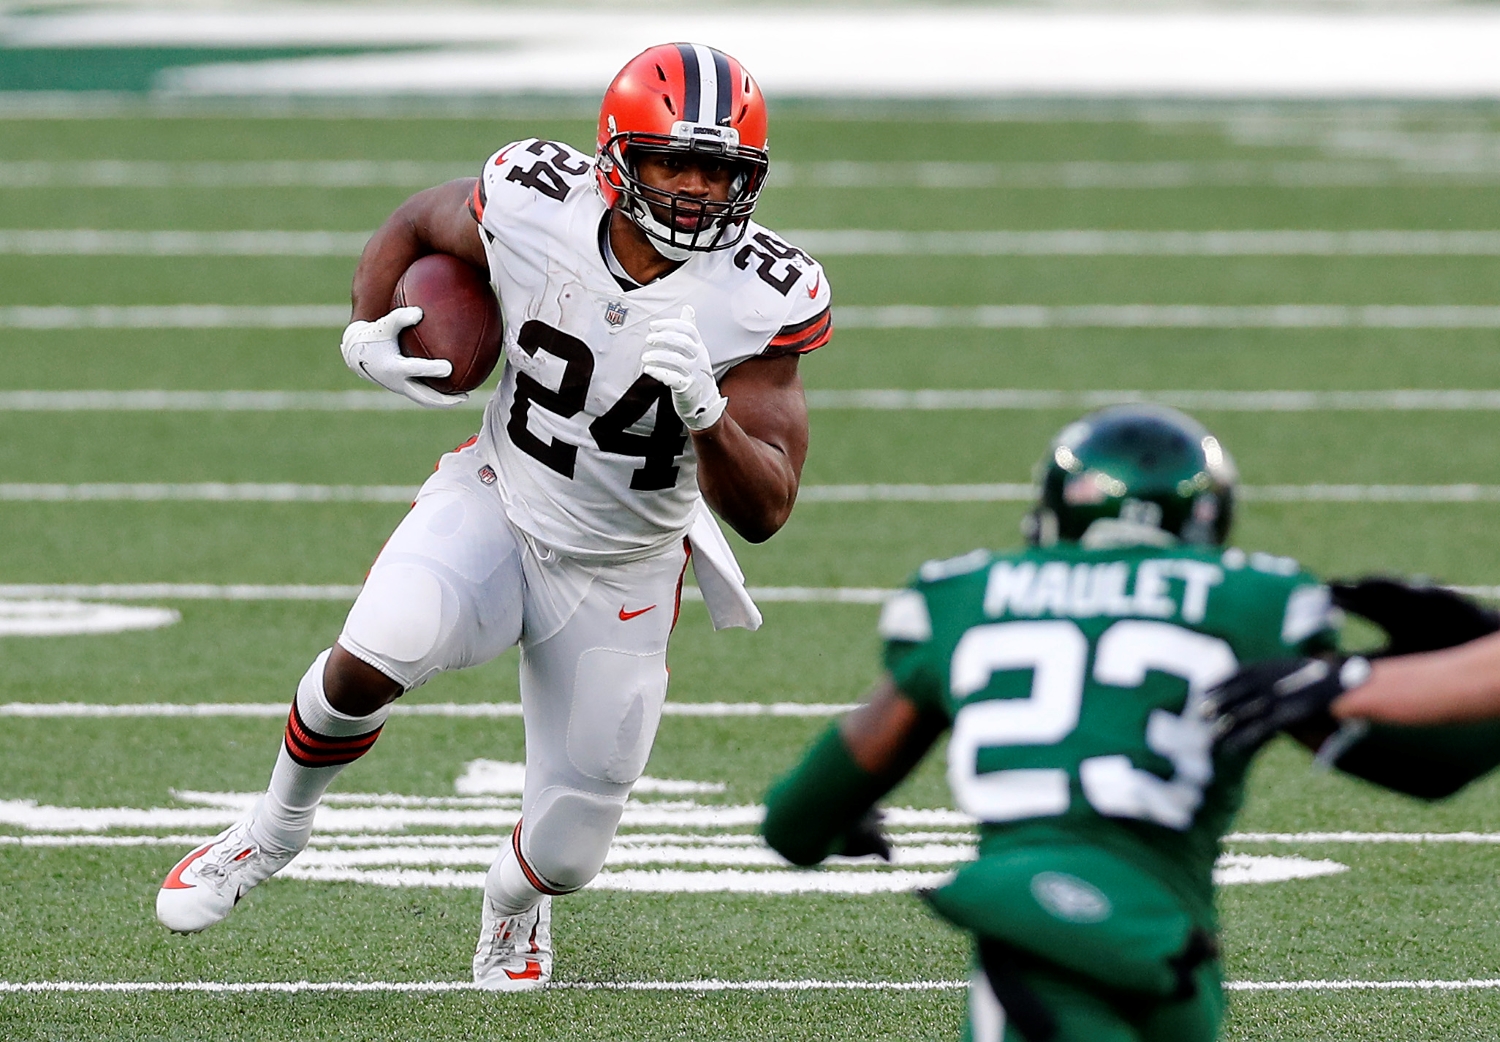 Cleveland Browns running back Nick Chubb carries the ball against the New York Jets.